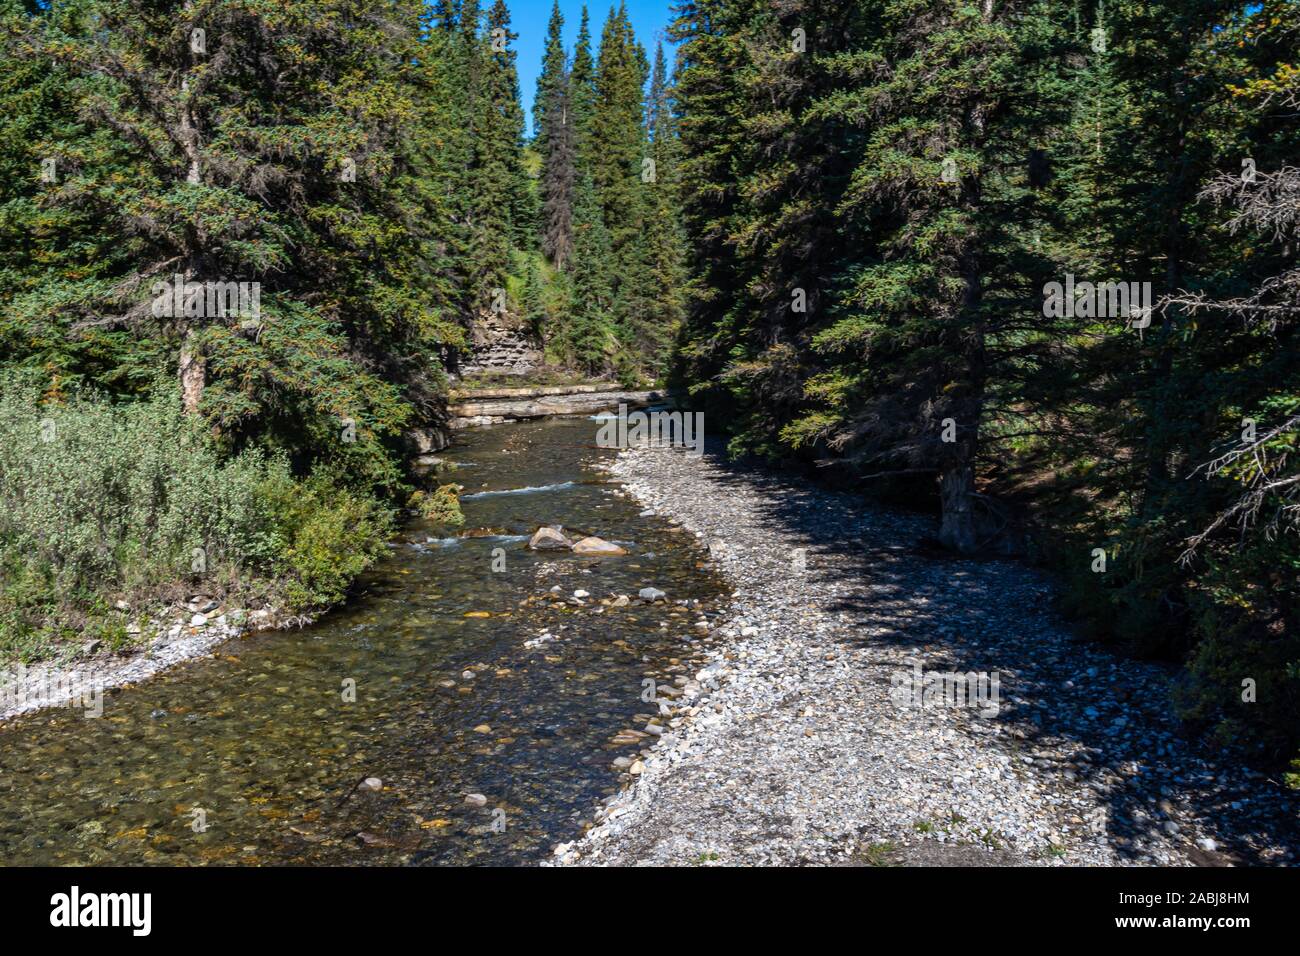 Beautiful flowing mountain stream along a rocky riverbed, lined with beautiful trees and rock walls. Stock Photo